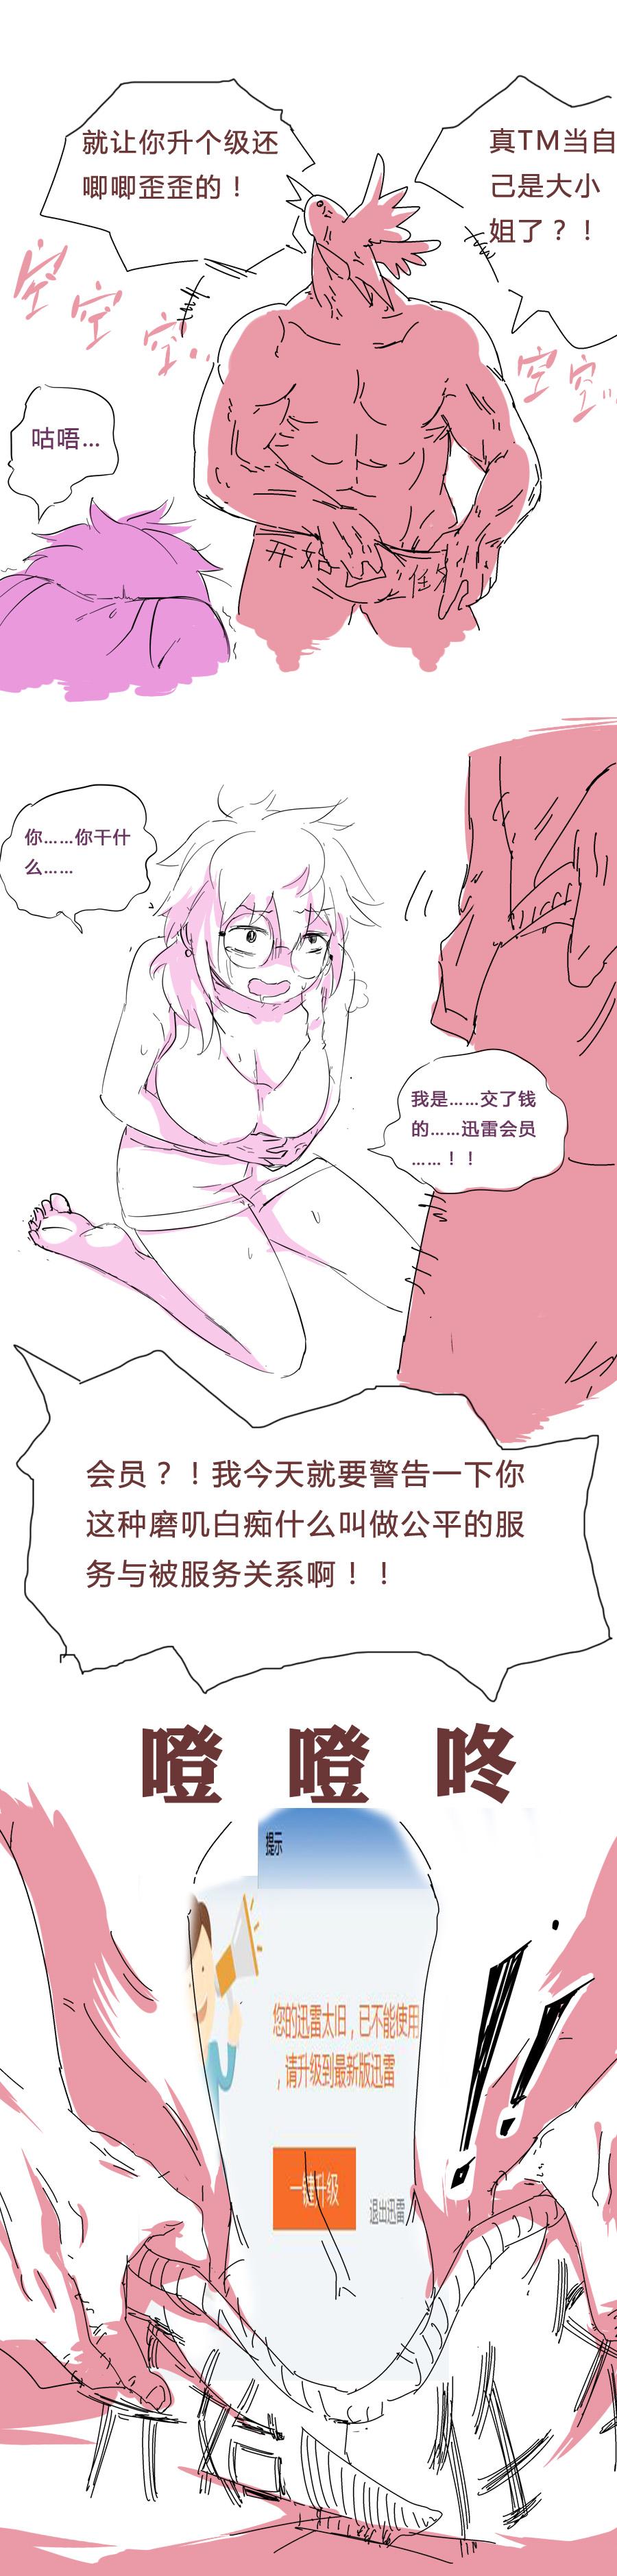 Roughsex 用户奸狱 Mistress - Page 3